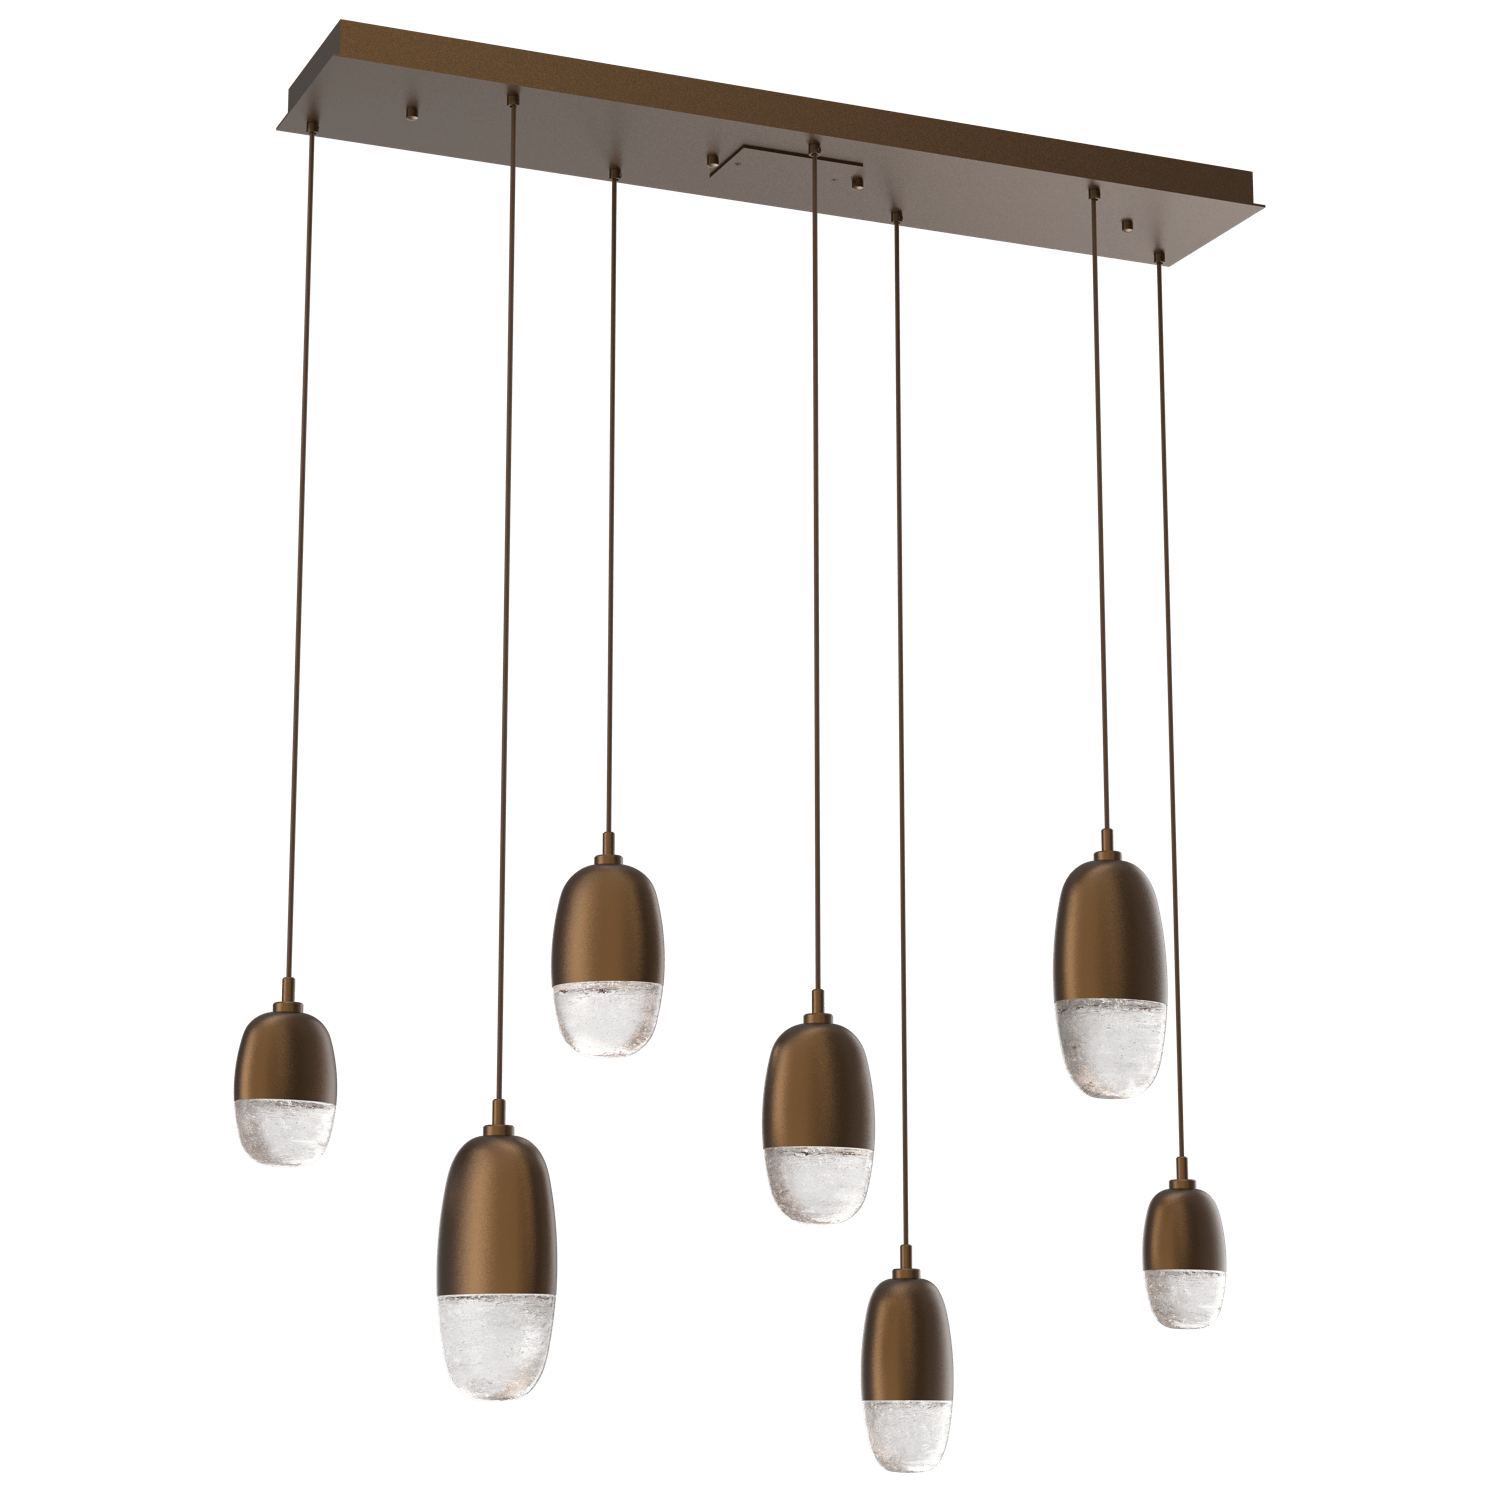 PLB0079-07-FB-Hammerton-Studio-Pebble-7-light-linear-pendant-chandelier-with-flat-bronze-finish-and-clear-cast-glass-shades-and-LED-lamping